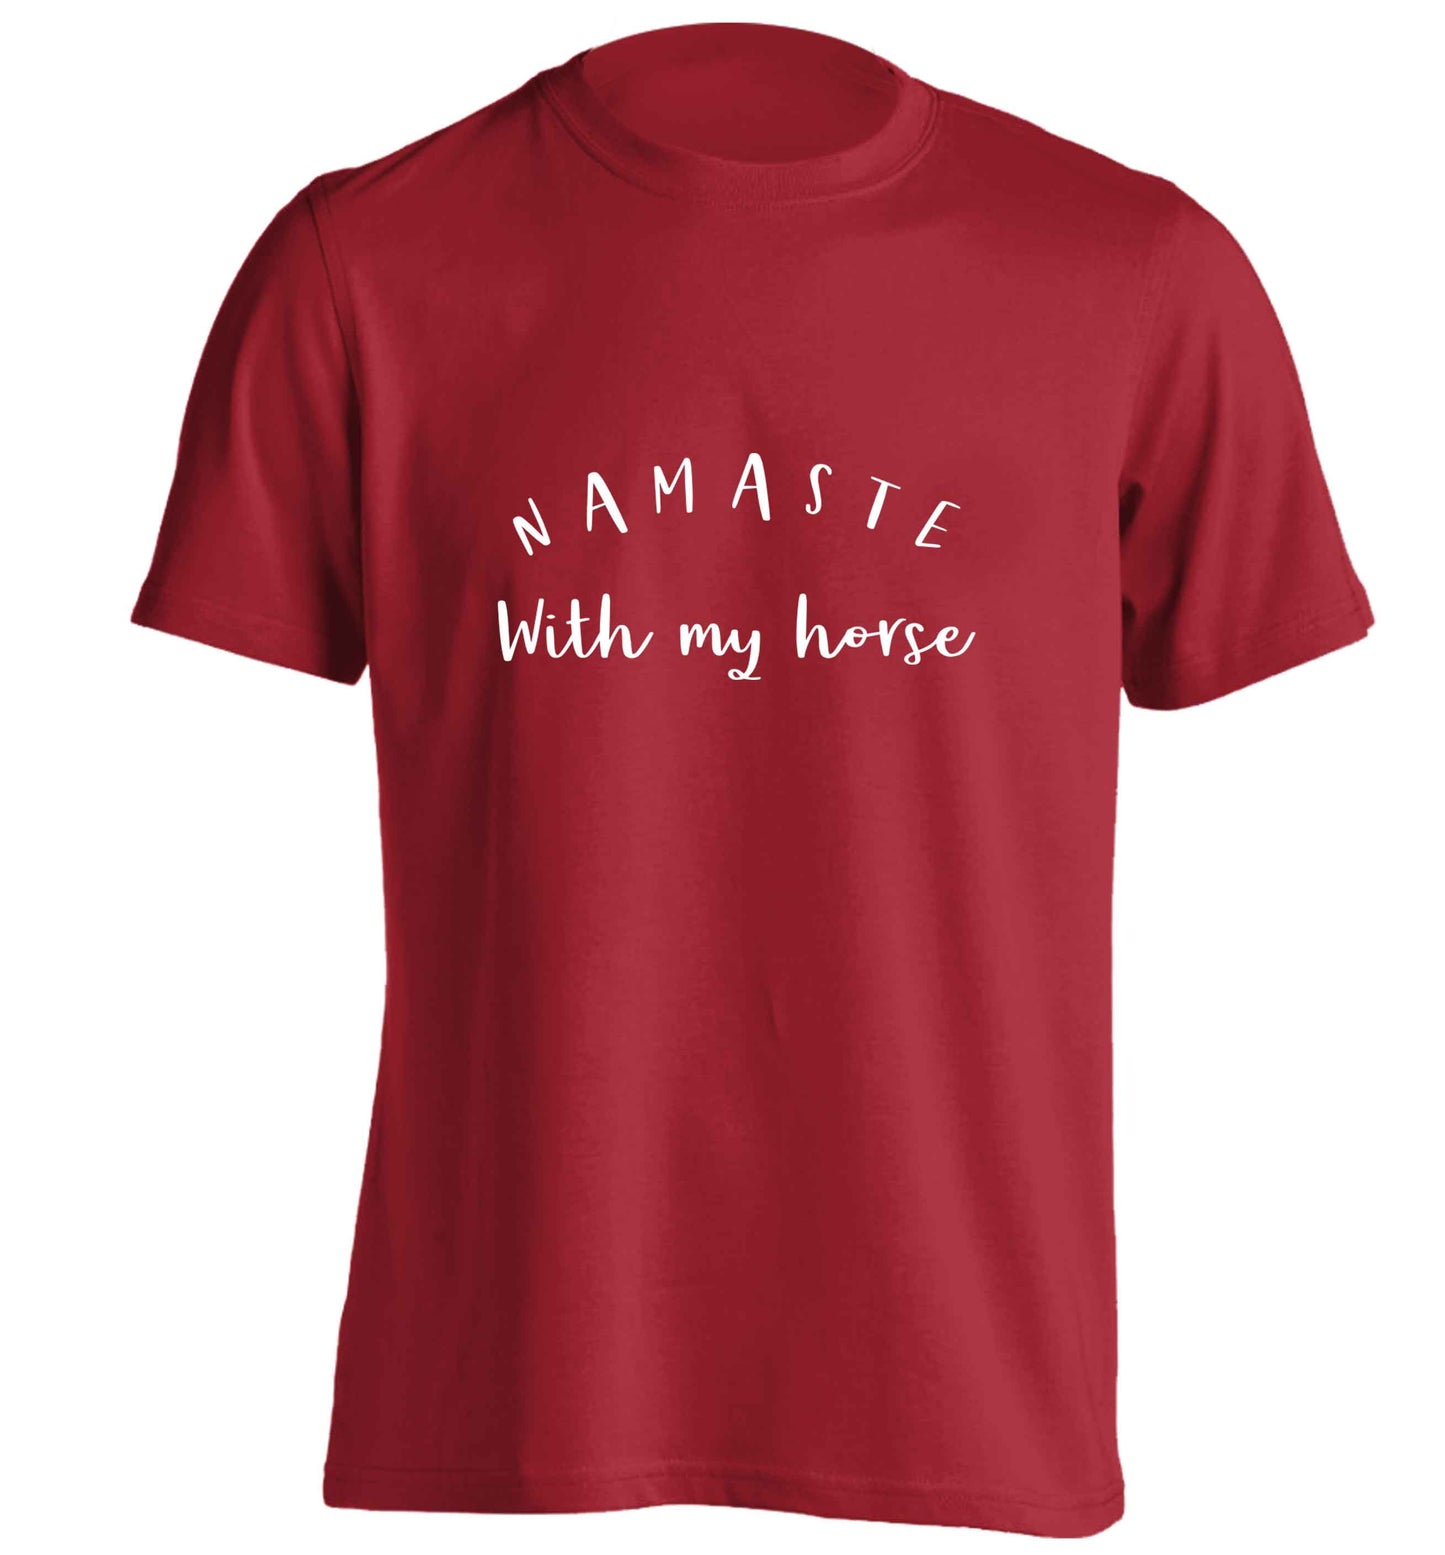 Namaste with my horse adults unisex red Tshirt 2XL